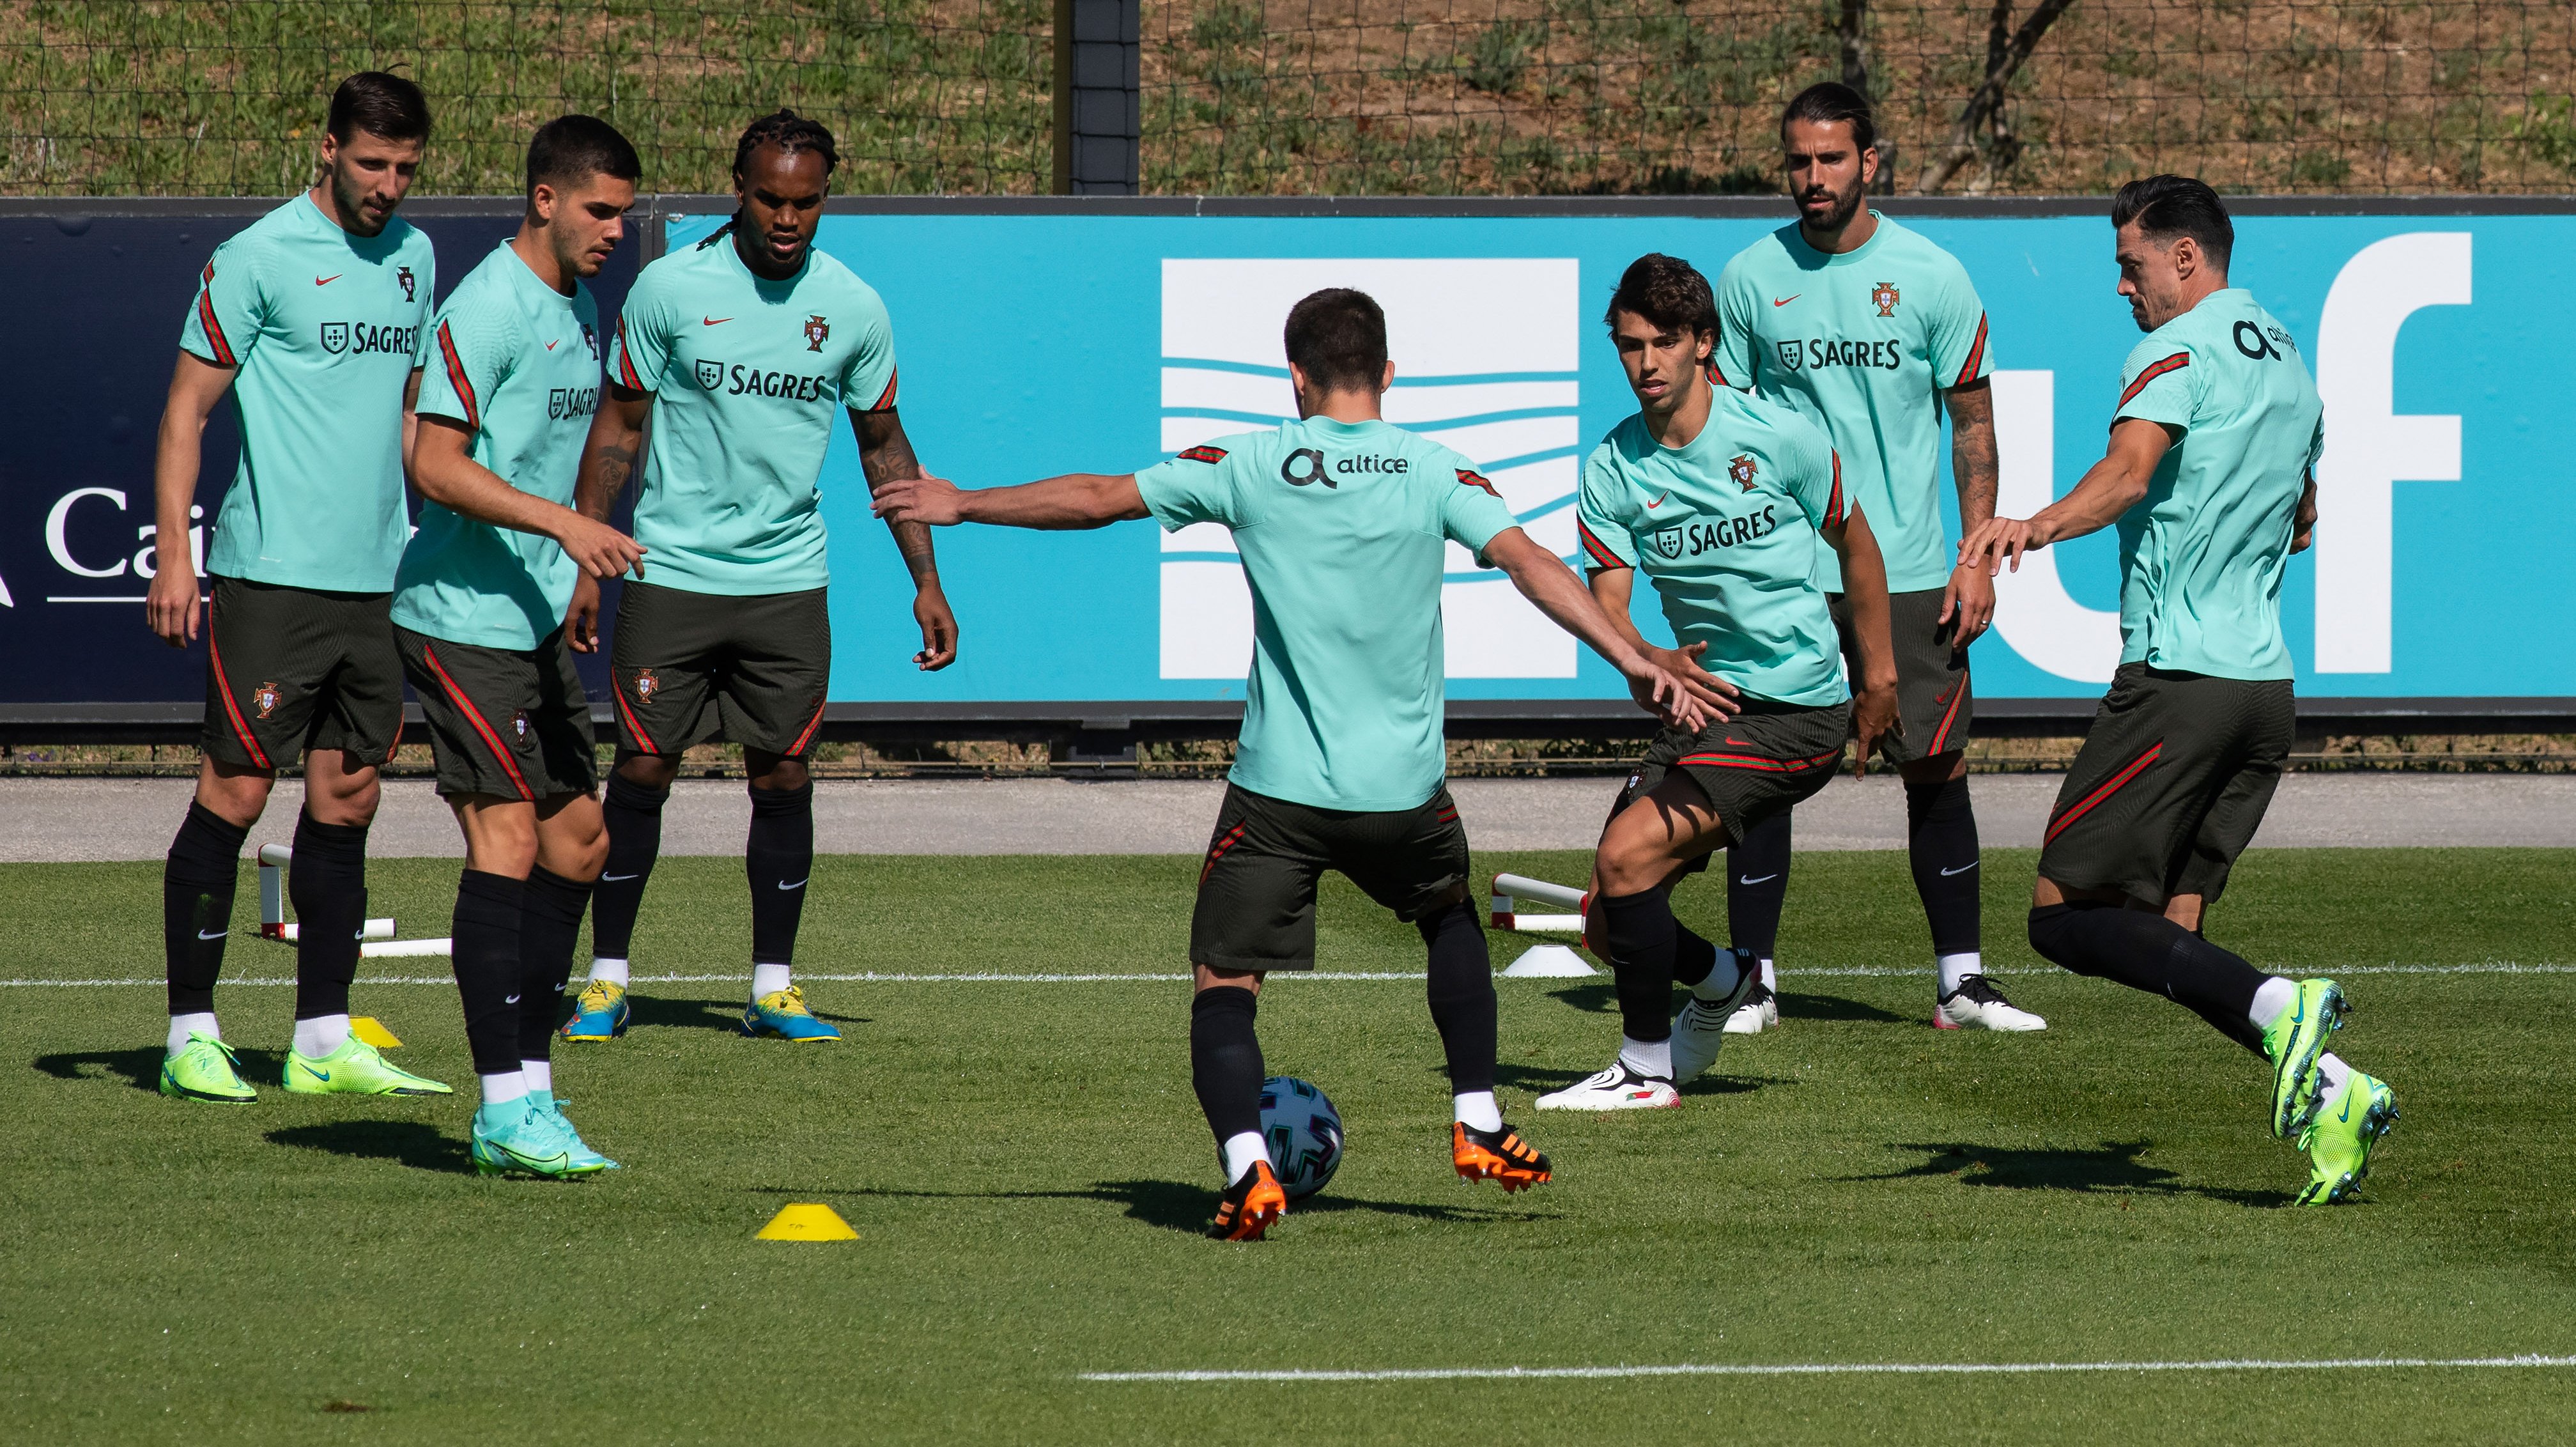 Portugal team players in action during the training session